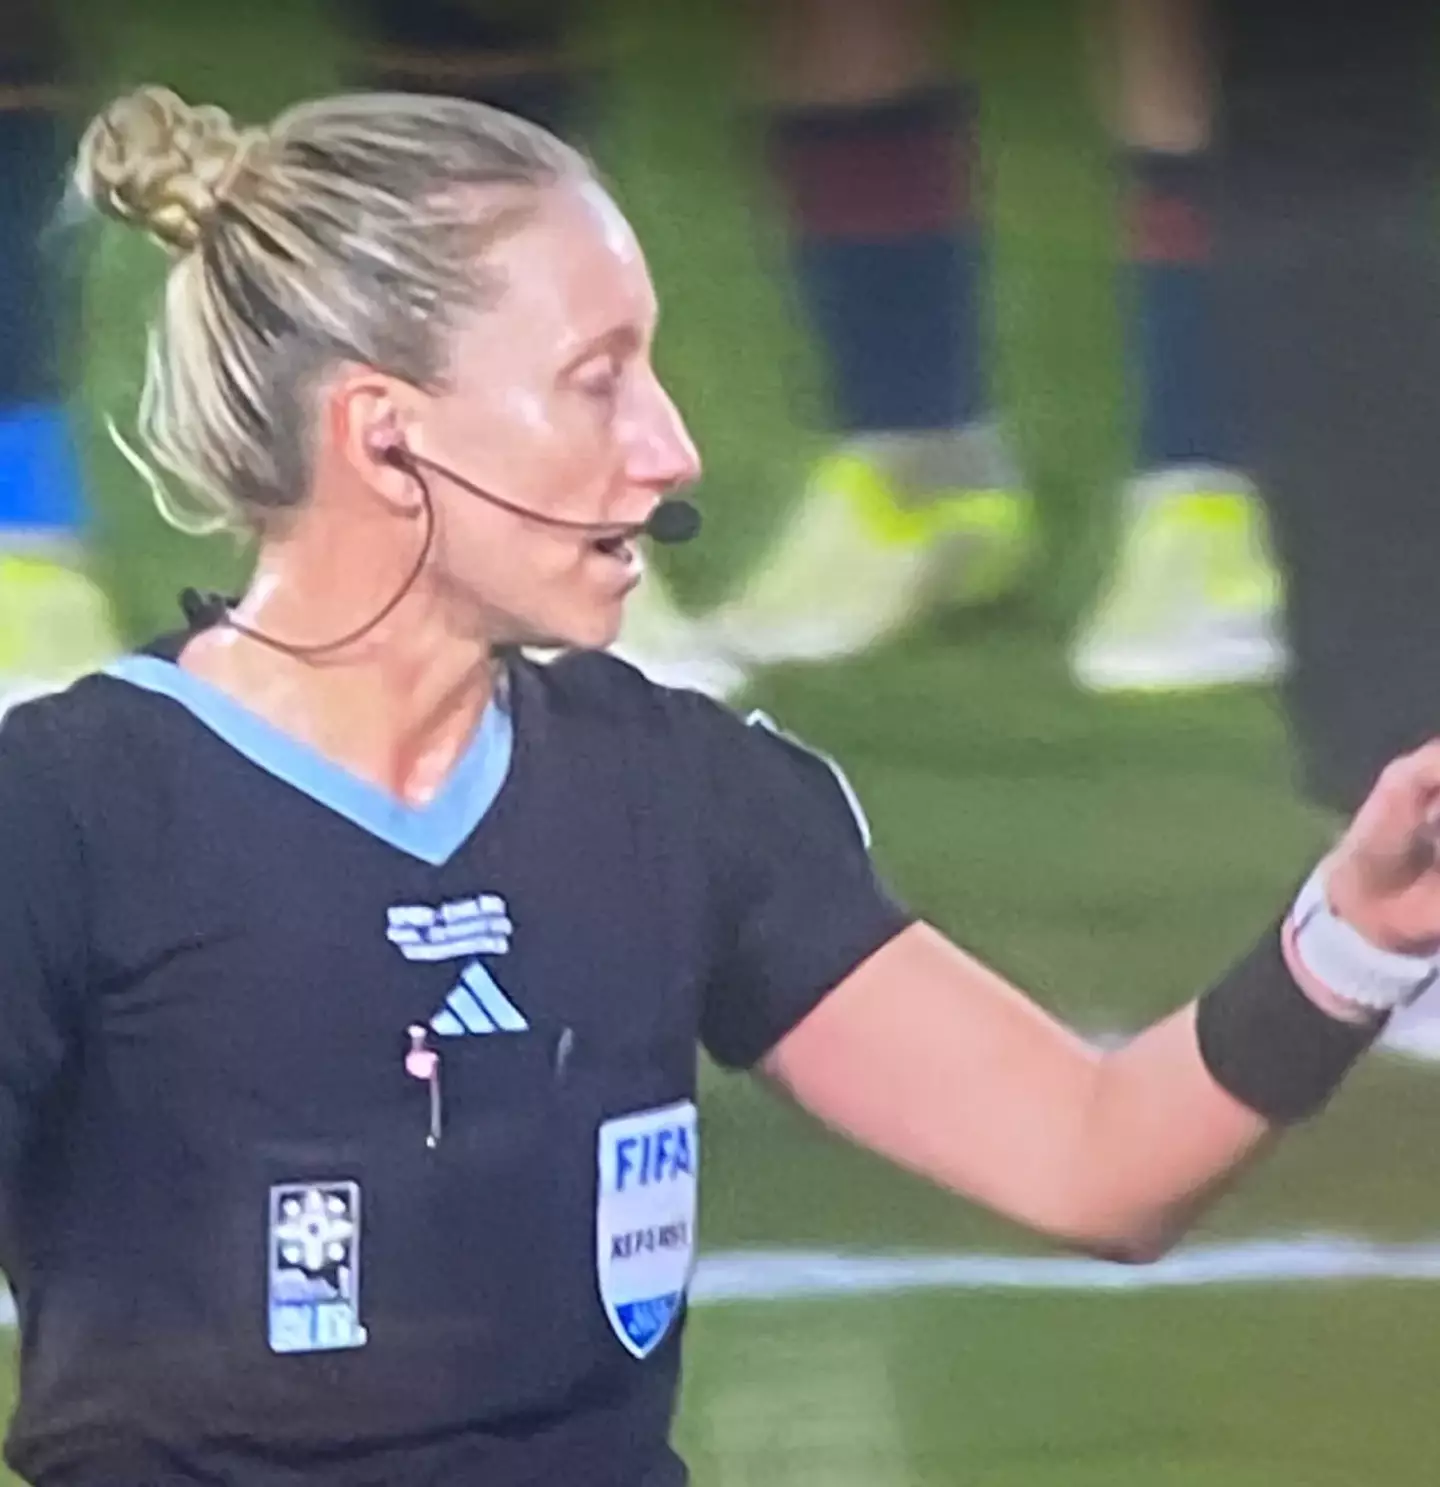 Refs at the final were given mics.